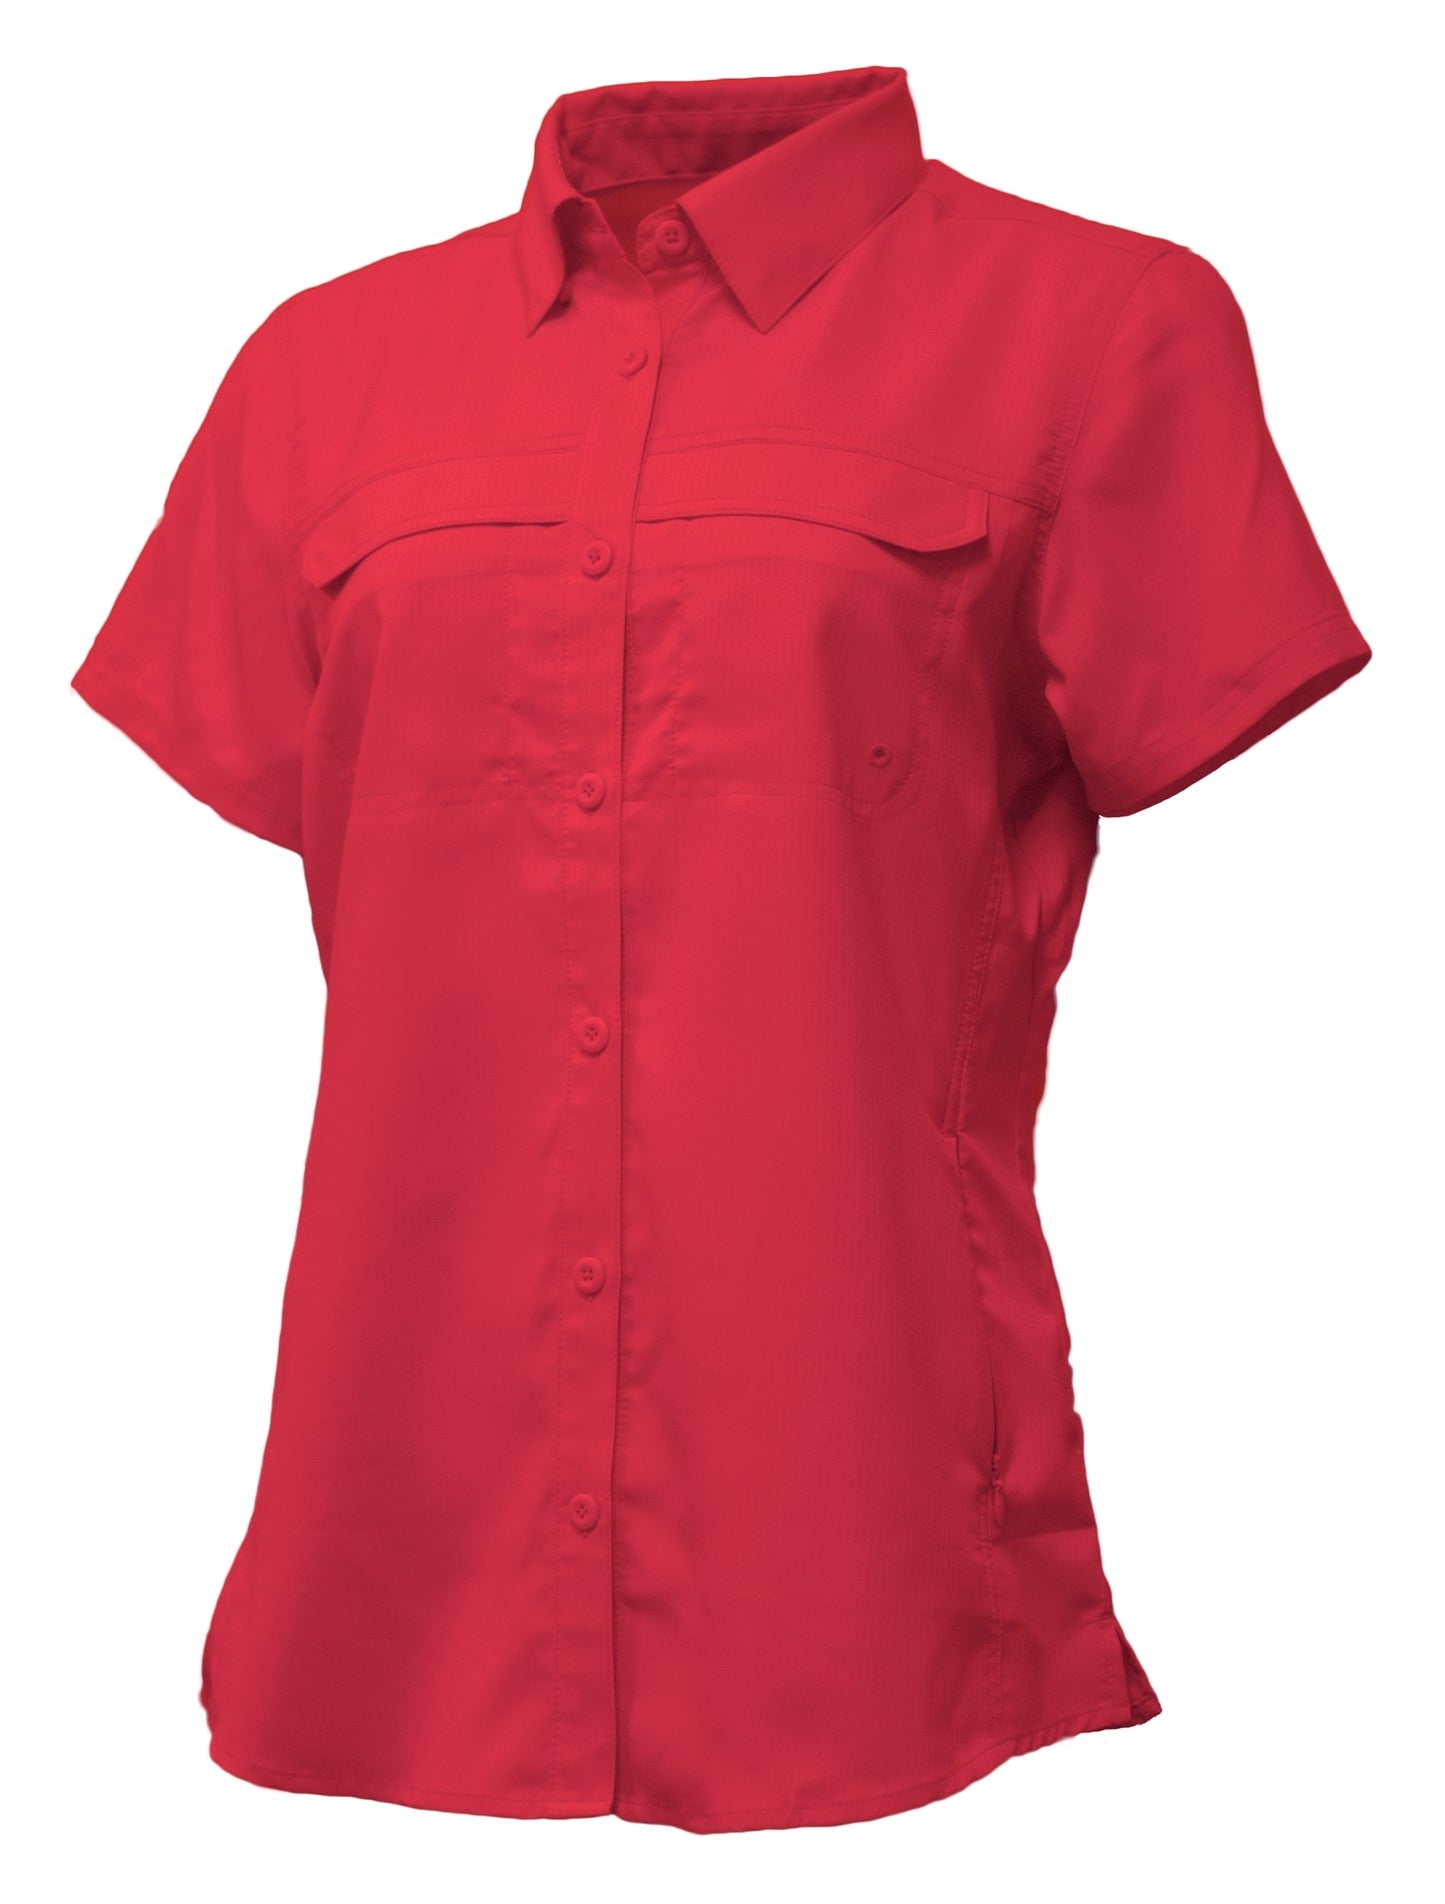 BAW® Women's Short Sleeve - Coral